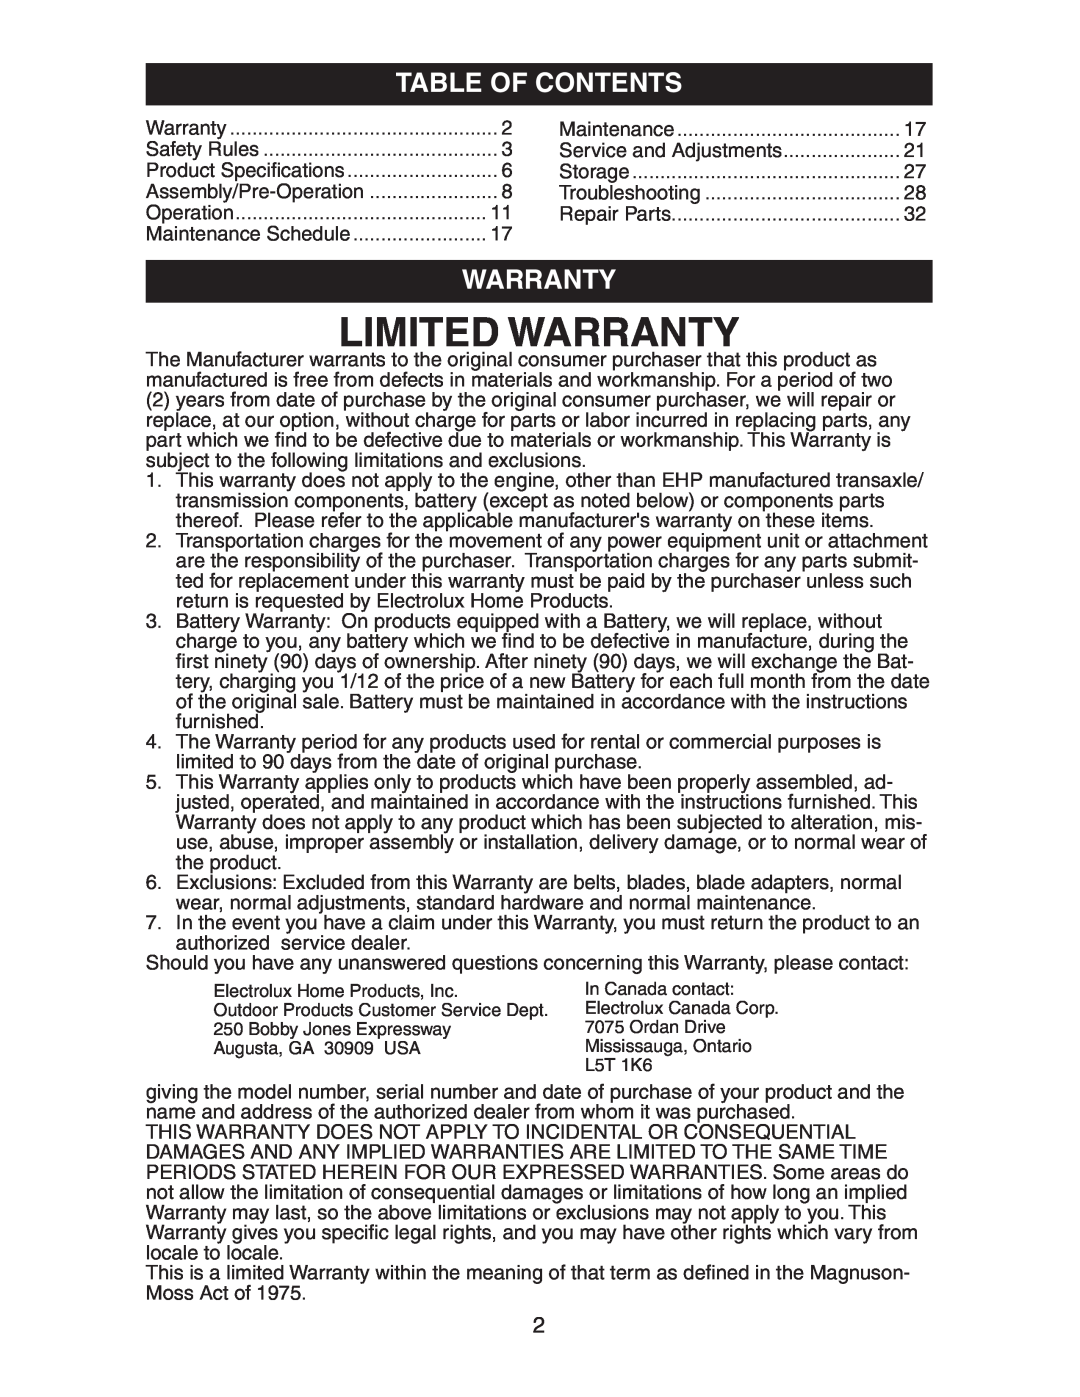 Poulan AG17542STB manual Table Of Contents, Limited Warranty 